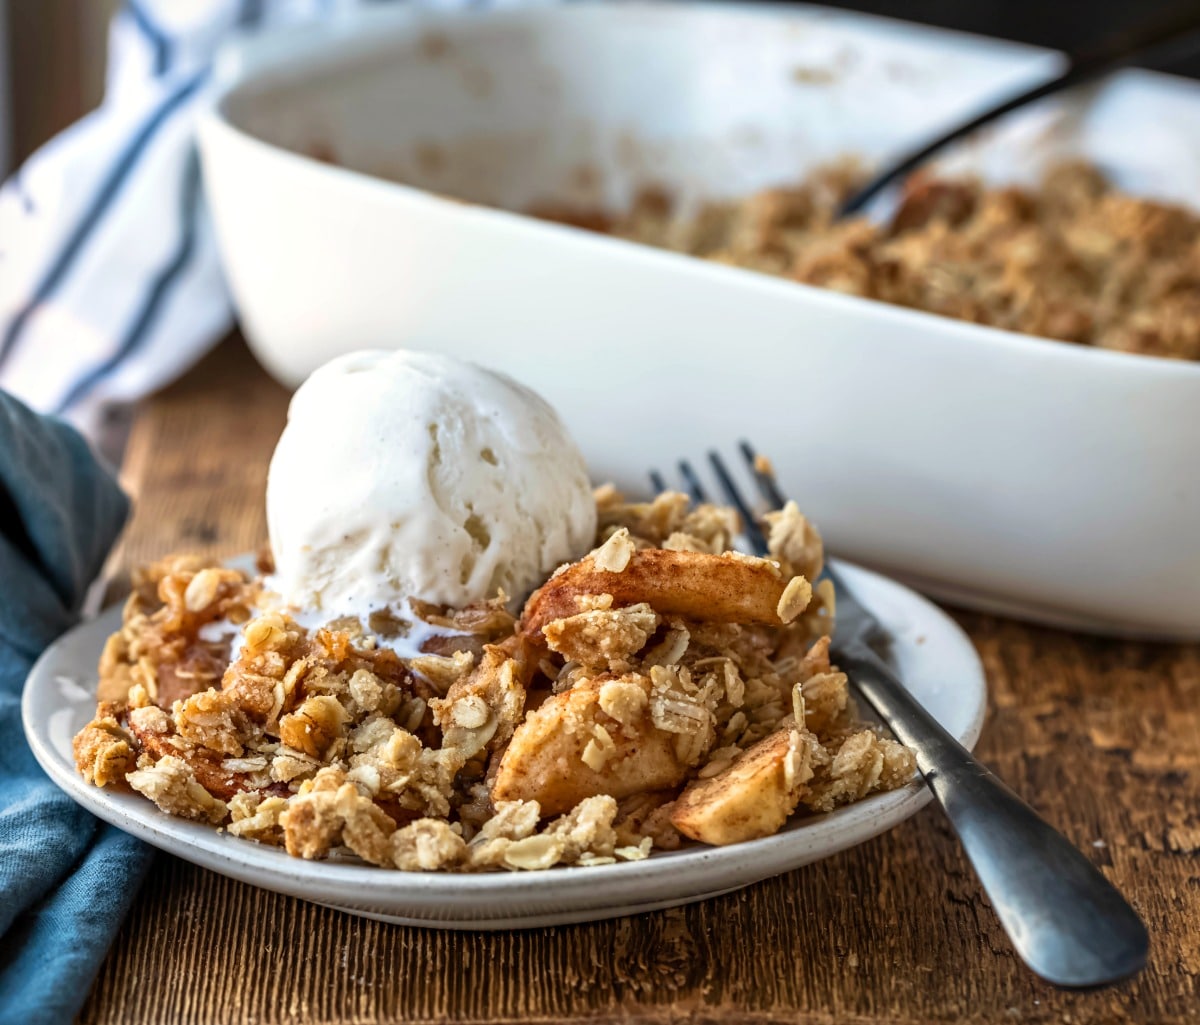 Dish of apple crisp with a black fork sitting on it